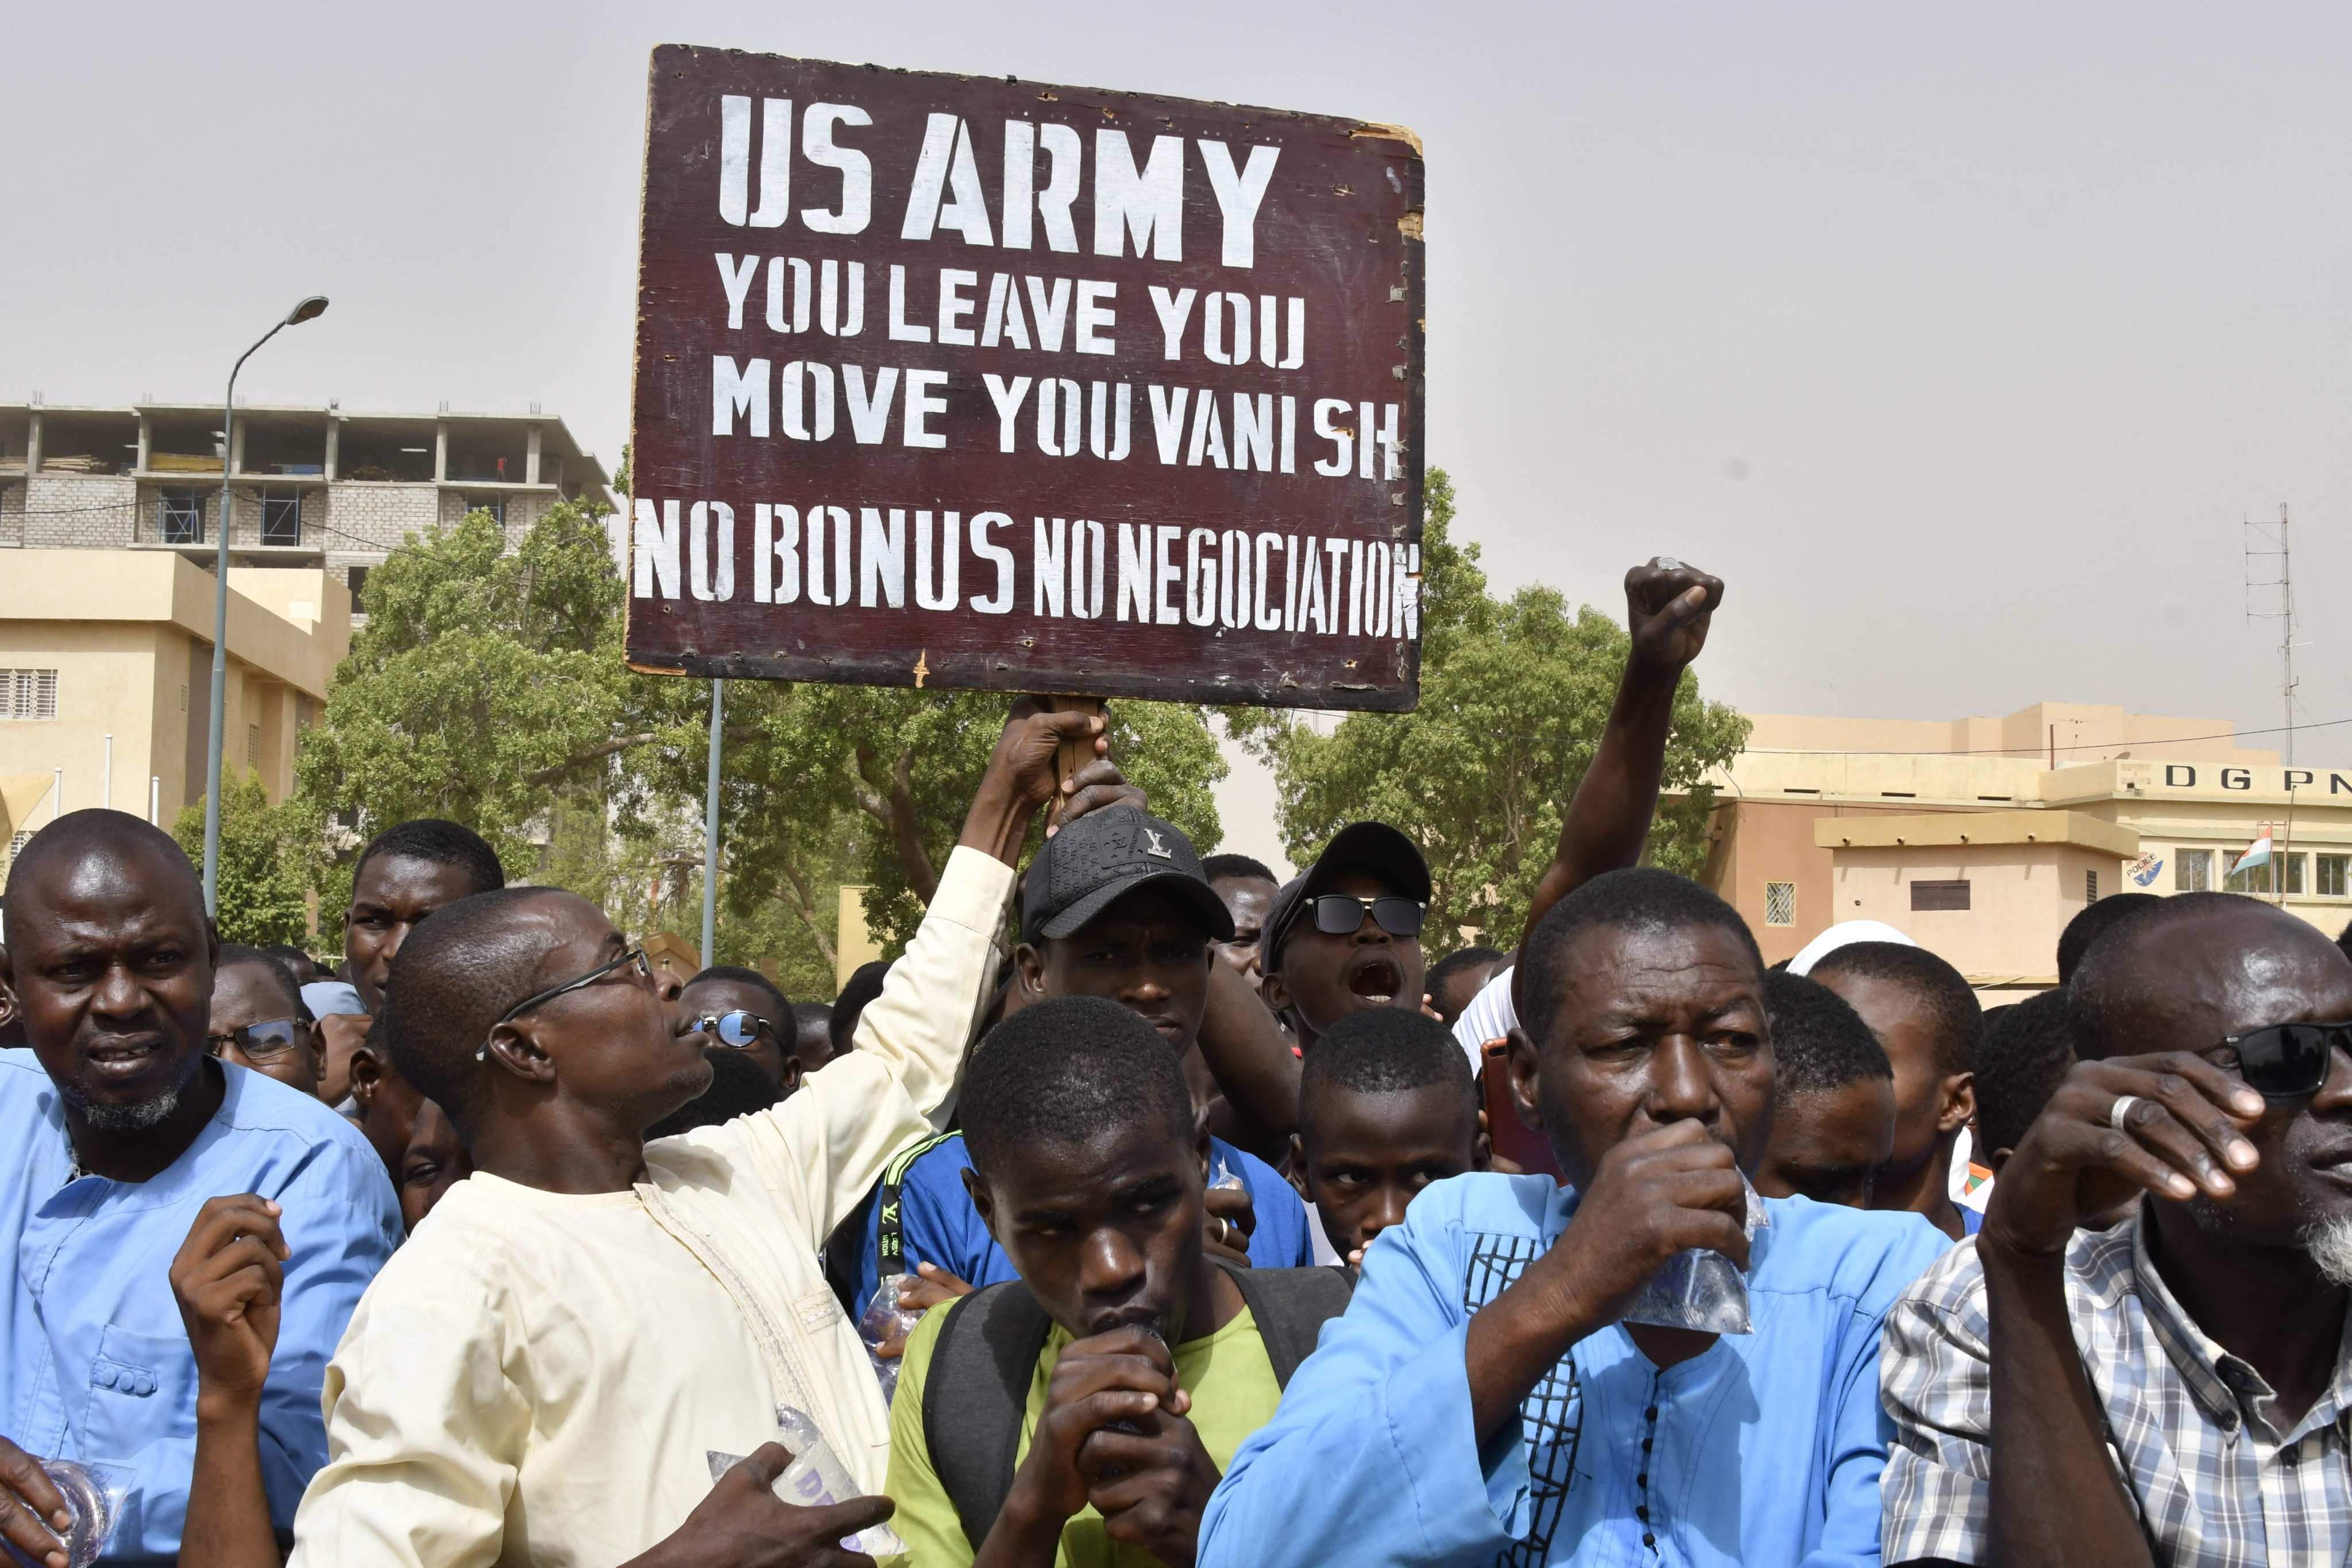 Protesters demanding US soldiers leave Niger in Niamey last month. Photo: AP